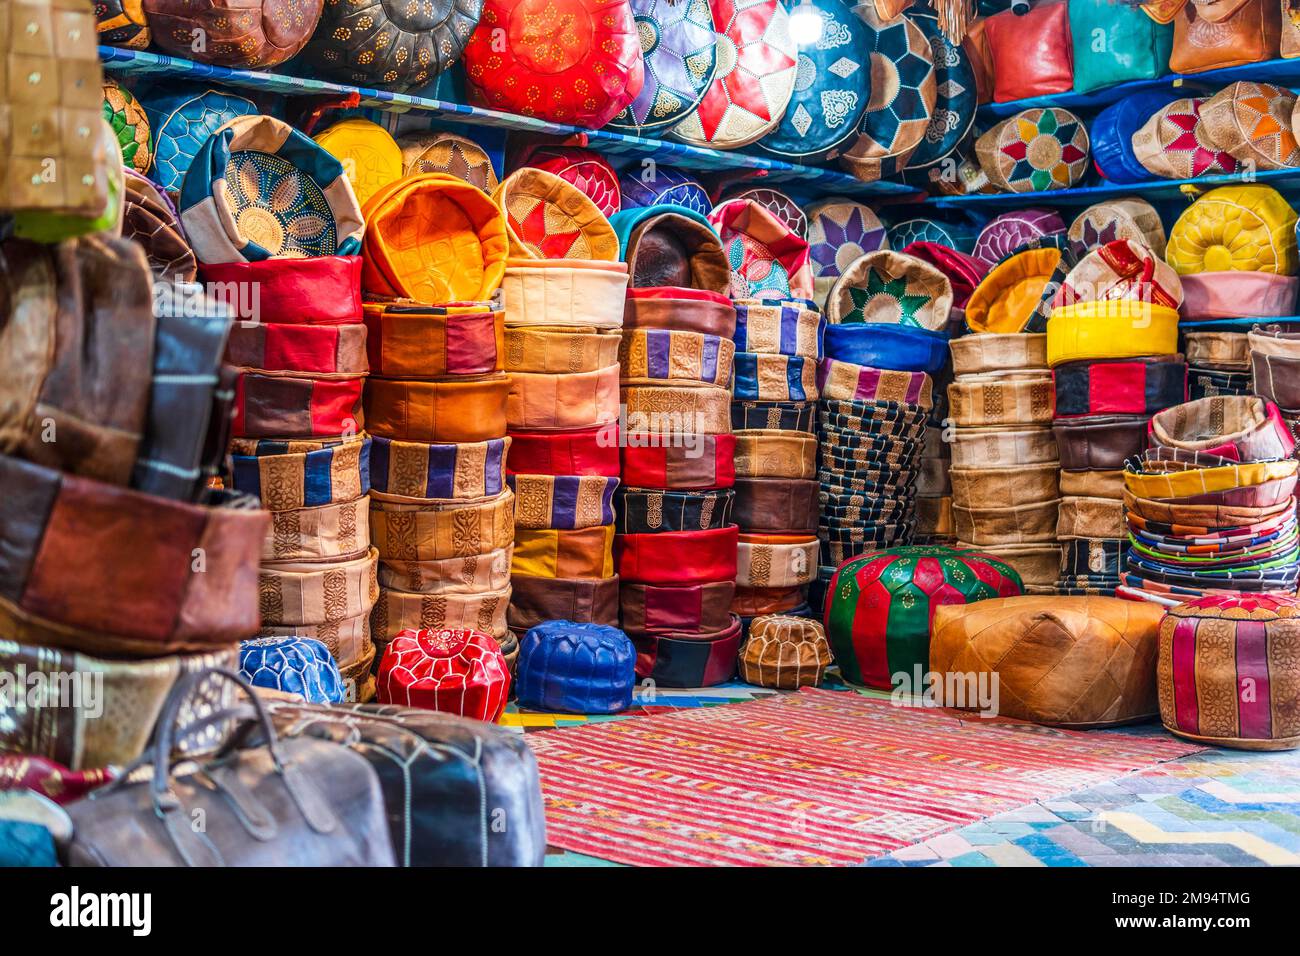 Variety of leather poufs sold in huge shop next to tannery in Fes, Morocco, North Africa Stock Photo